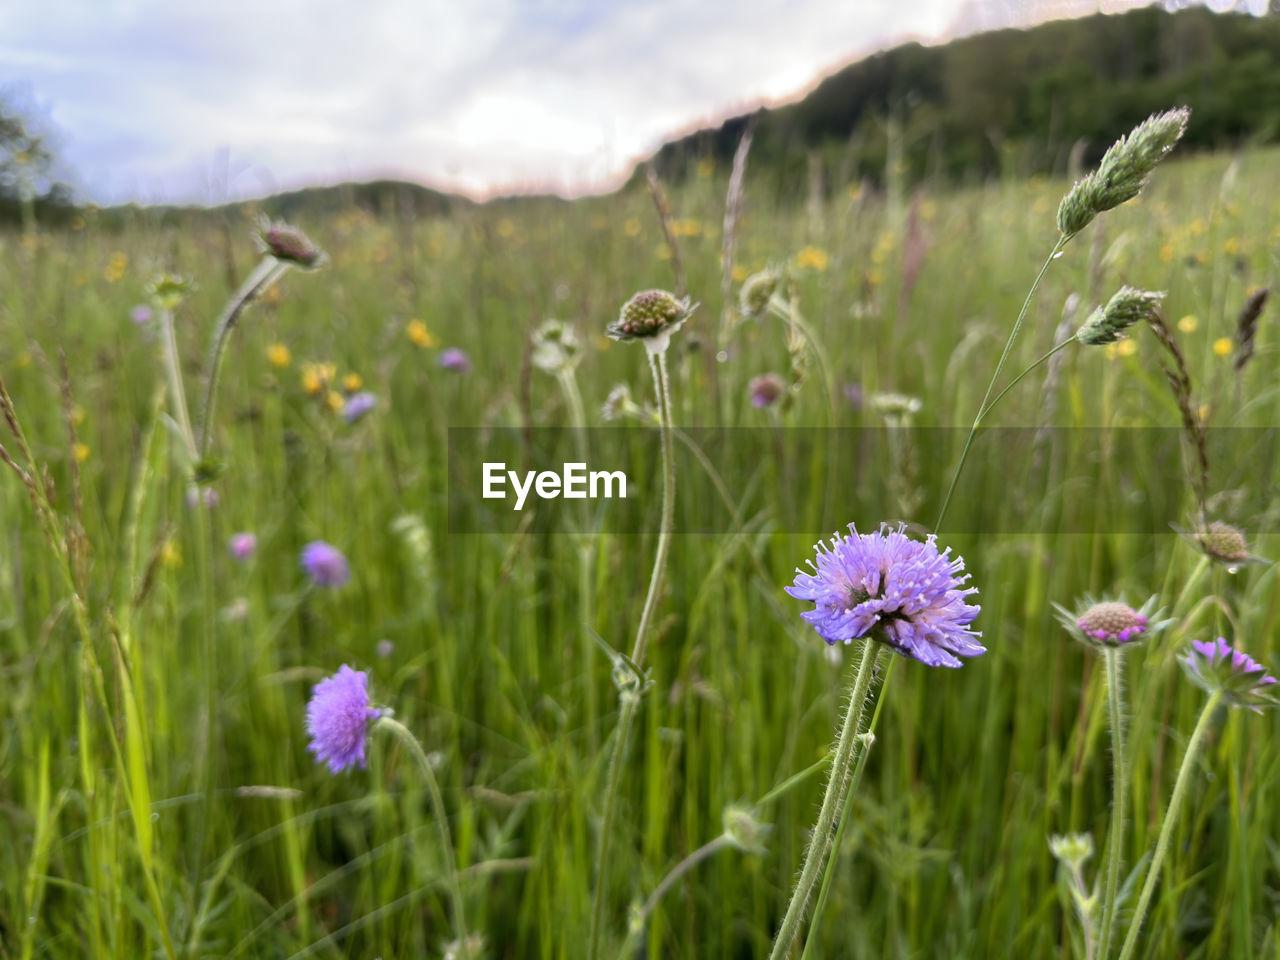 plant, flower, flowering plant, prairie, grassland, grass, field, nature, meadow, beauty in nature, natural environment, freshness, sky, land, cloud, landscape, wildflower, environment, growth, purple, no people, fragility, close-up, focus on foreground, plain, outdoors, mountain, summer, green, non-urban scene, animal wildlife, day, rural scene, flower head, scenics - nature, tranquility, food, animal, inflorescence, blossom, springtime, animal themes, tranquil scene, botany, petal, medicine, sunlight